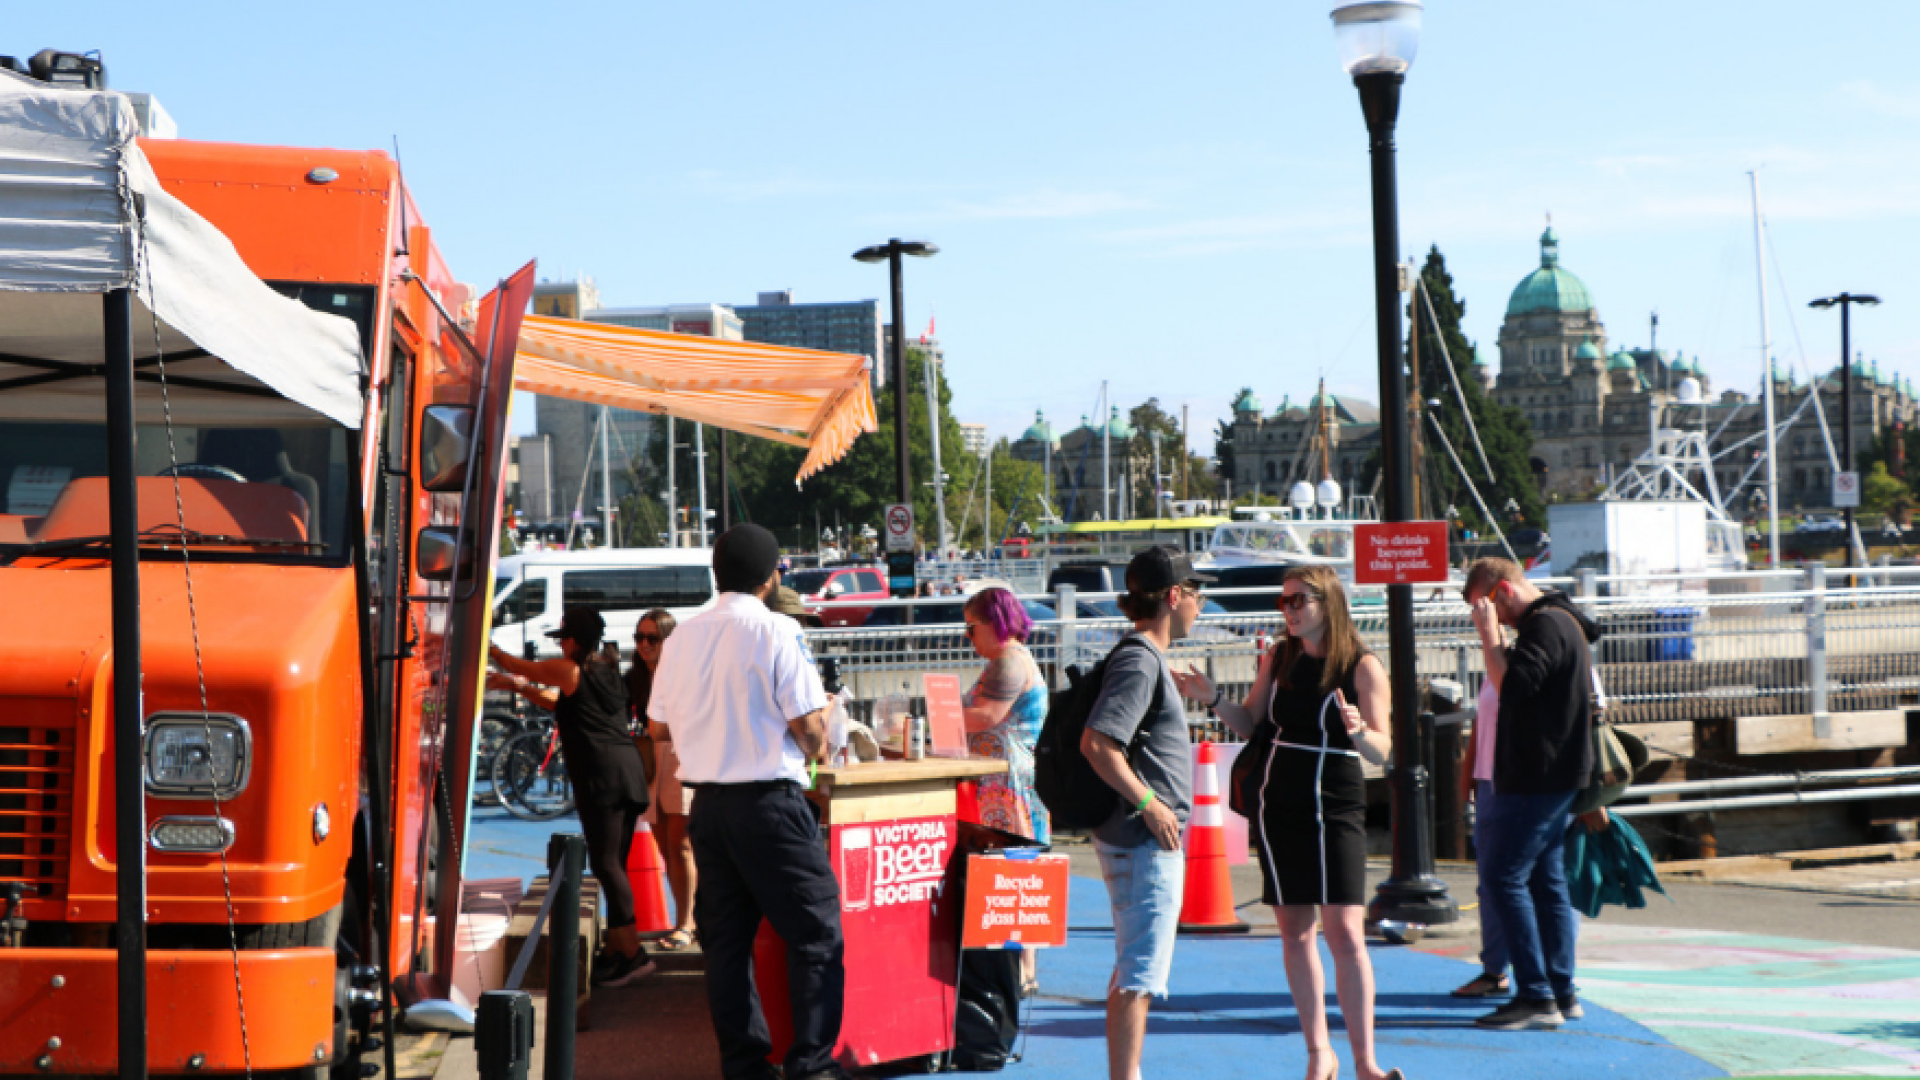 Image of the Victoria Beer Society's Food Truck with people standing close by at Ship Point